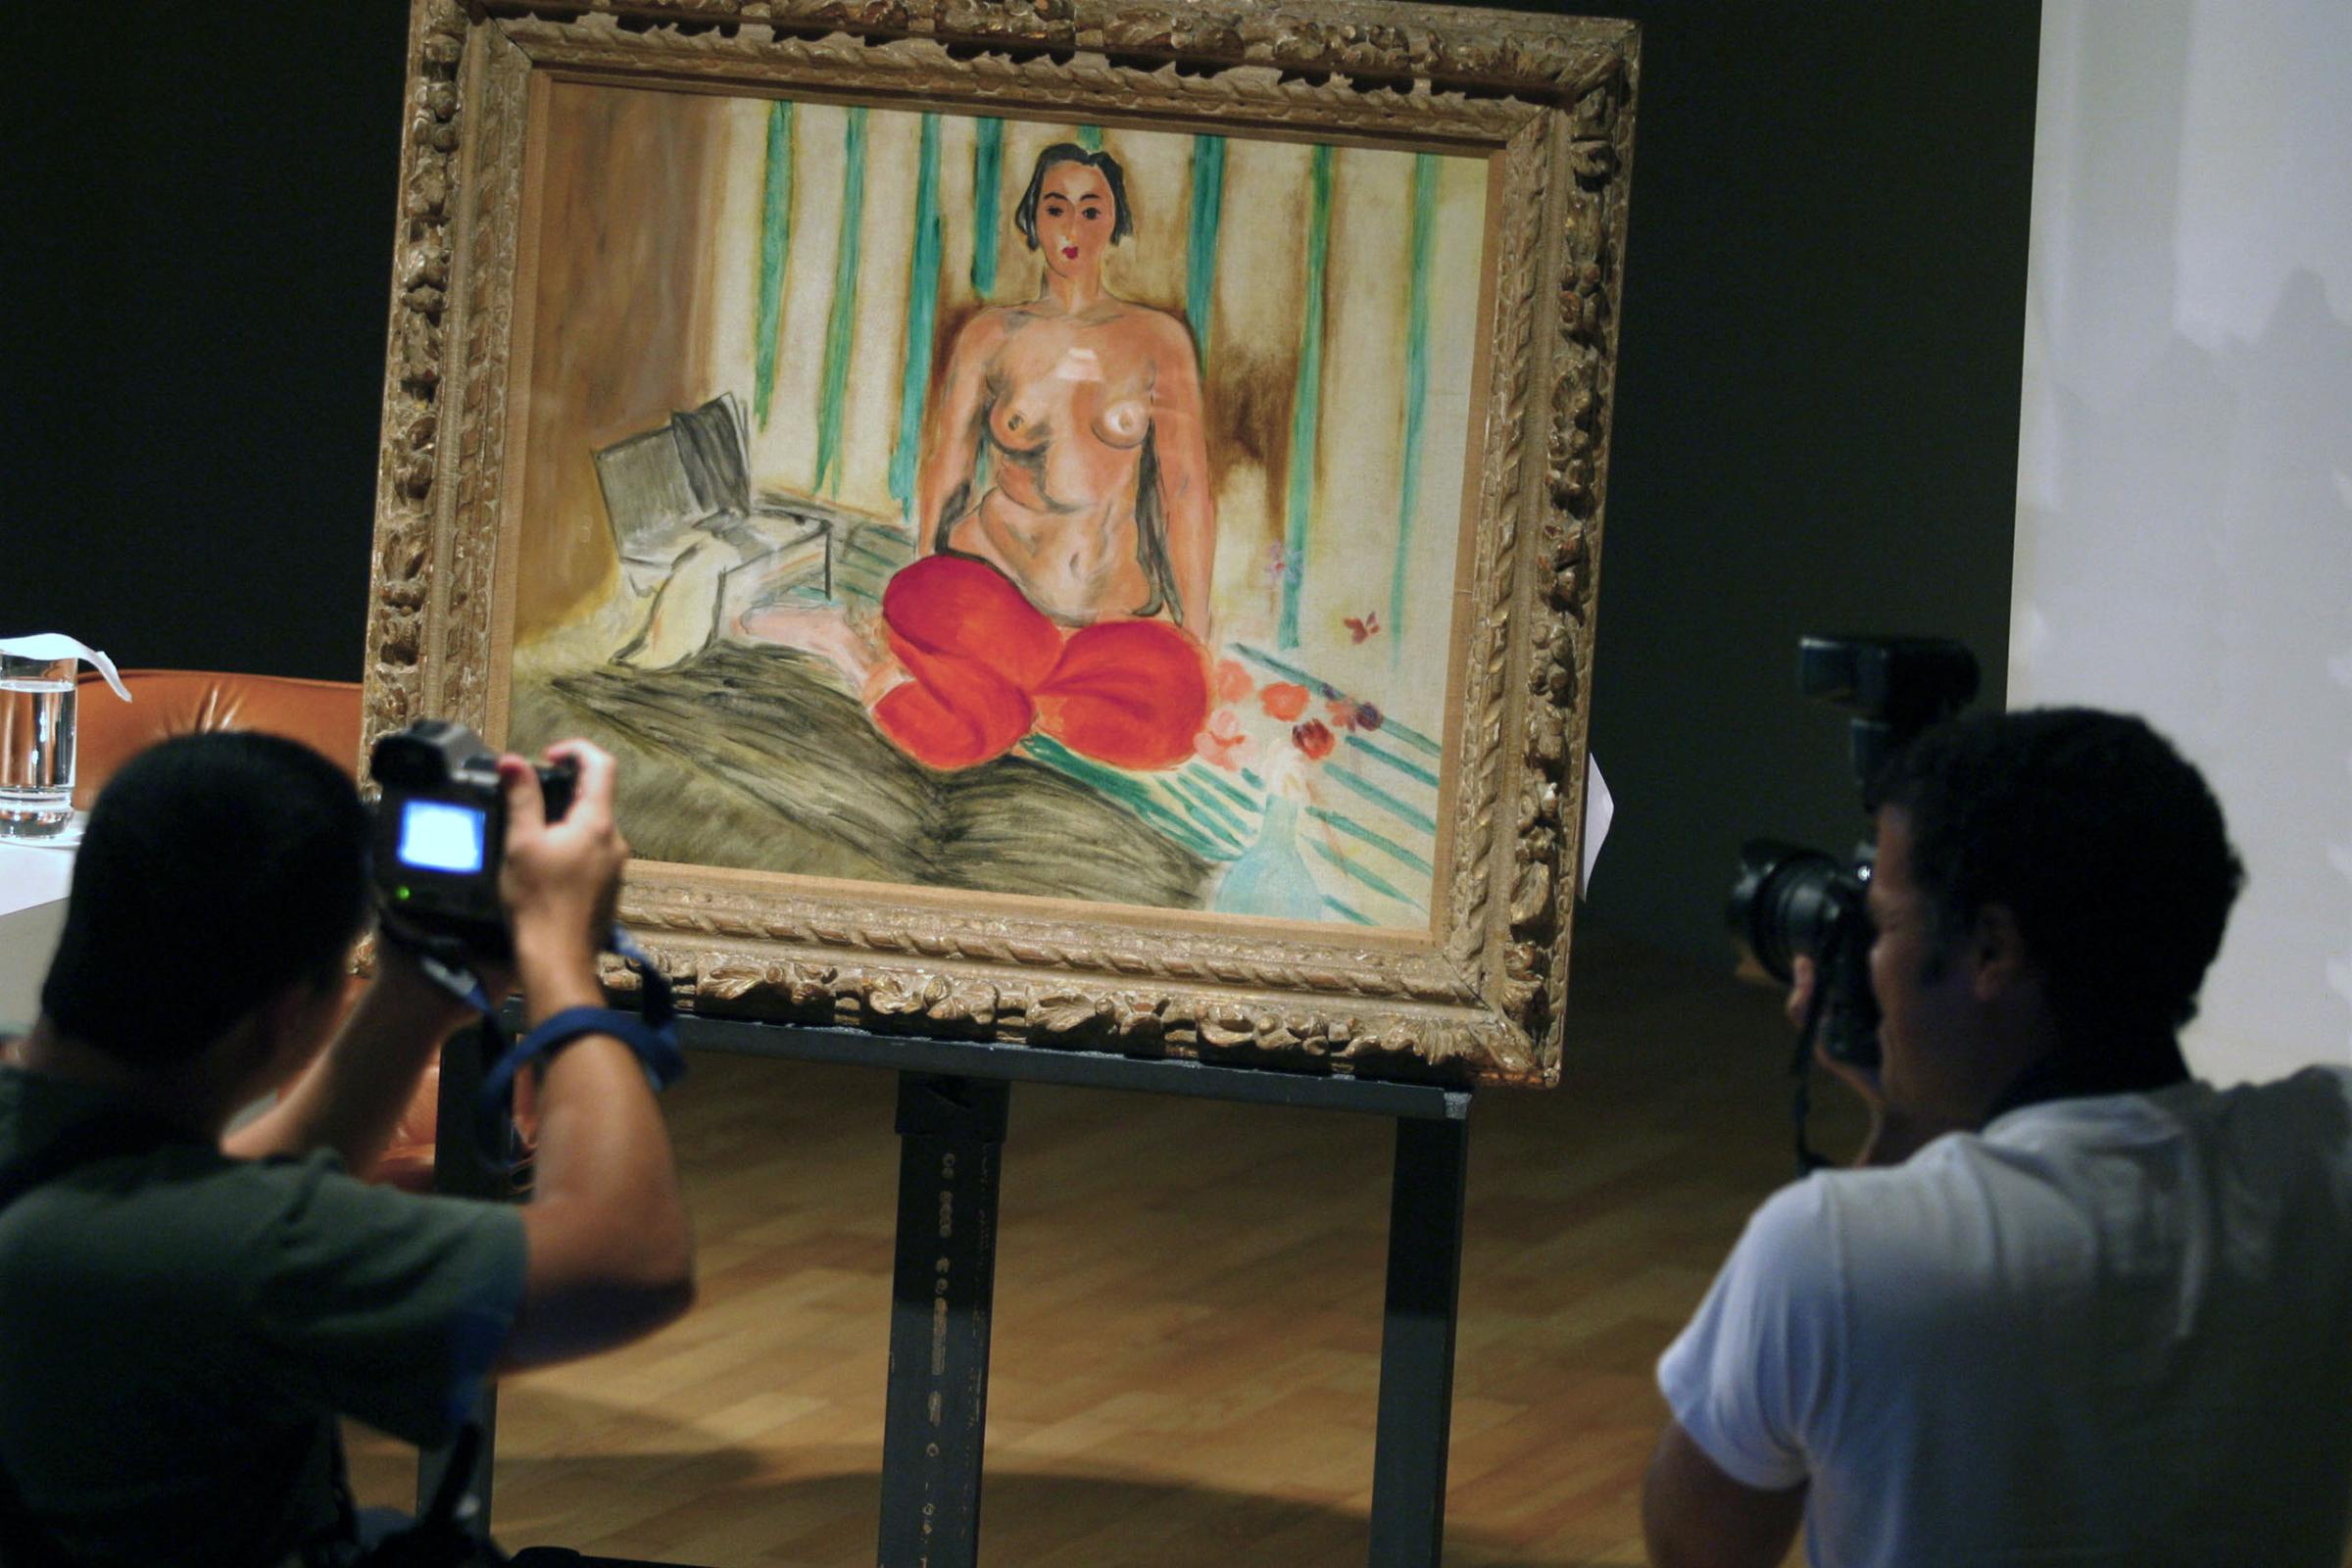 Photographers take pictures of the painting "Odalisque in Red Pants" by French painter Henri Matisse at the Museo de Arte Contemporaneo de Caracas Sofia Imber (MACCSI) in Caracas on Jan. 30, 2003.